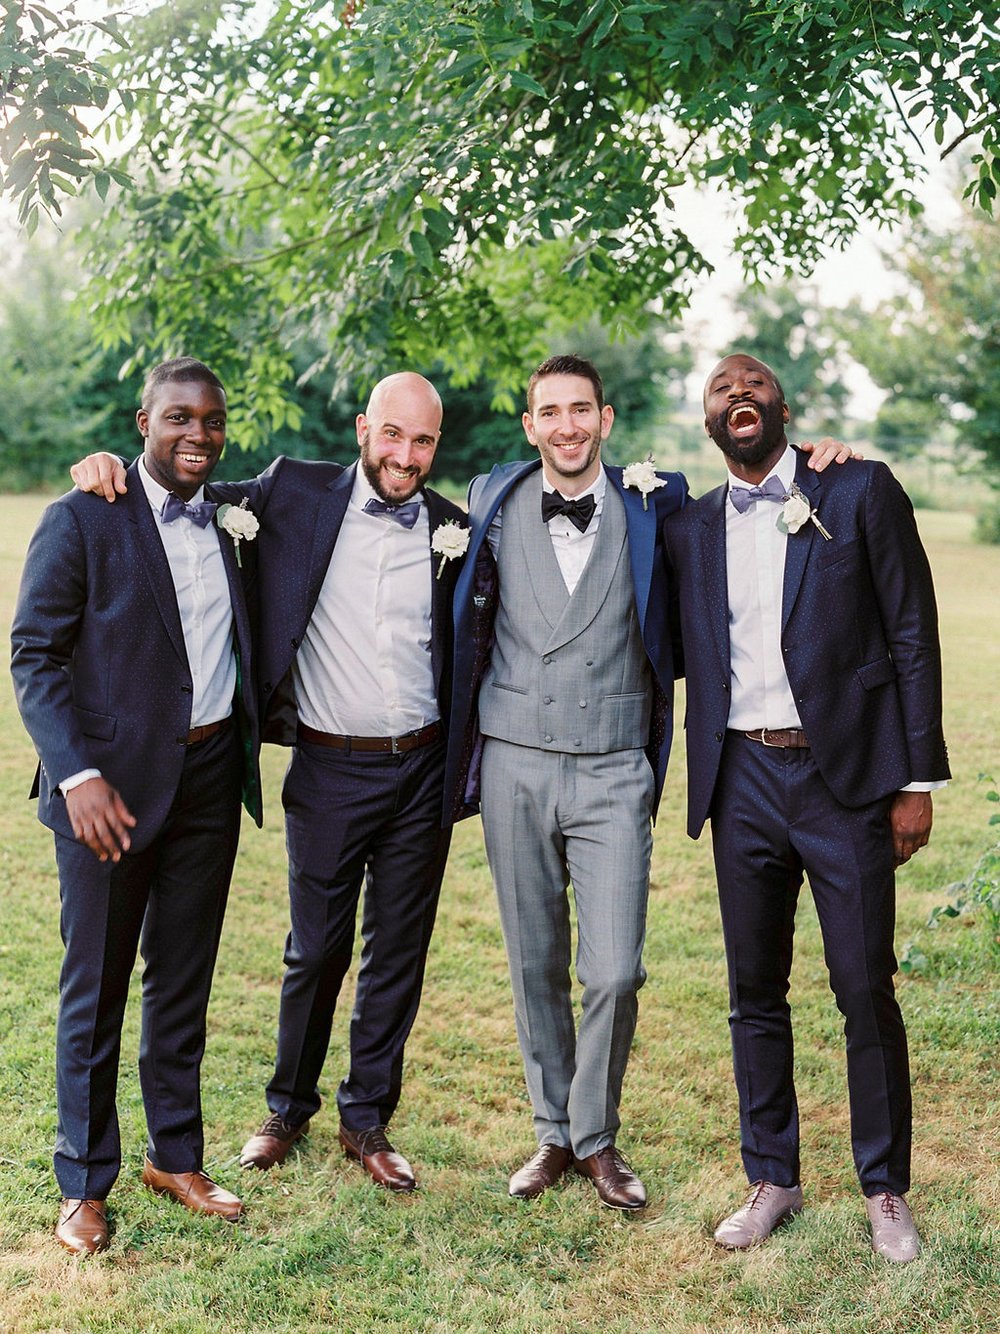 Groom and three groomsmen hugging each other's shoulders and smiling to the camera in a garden